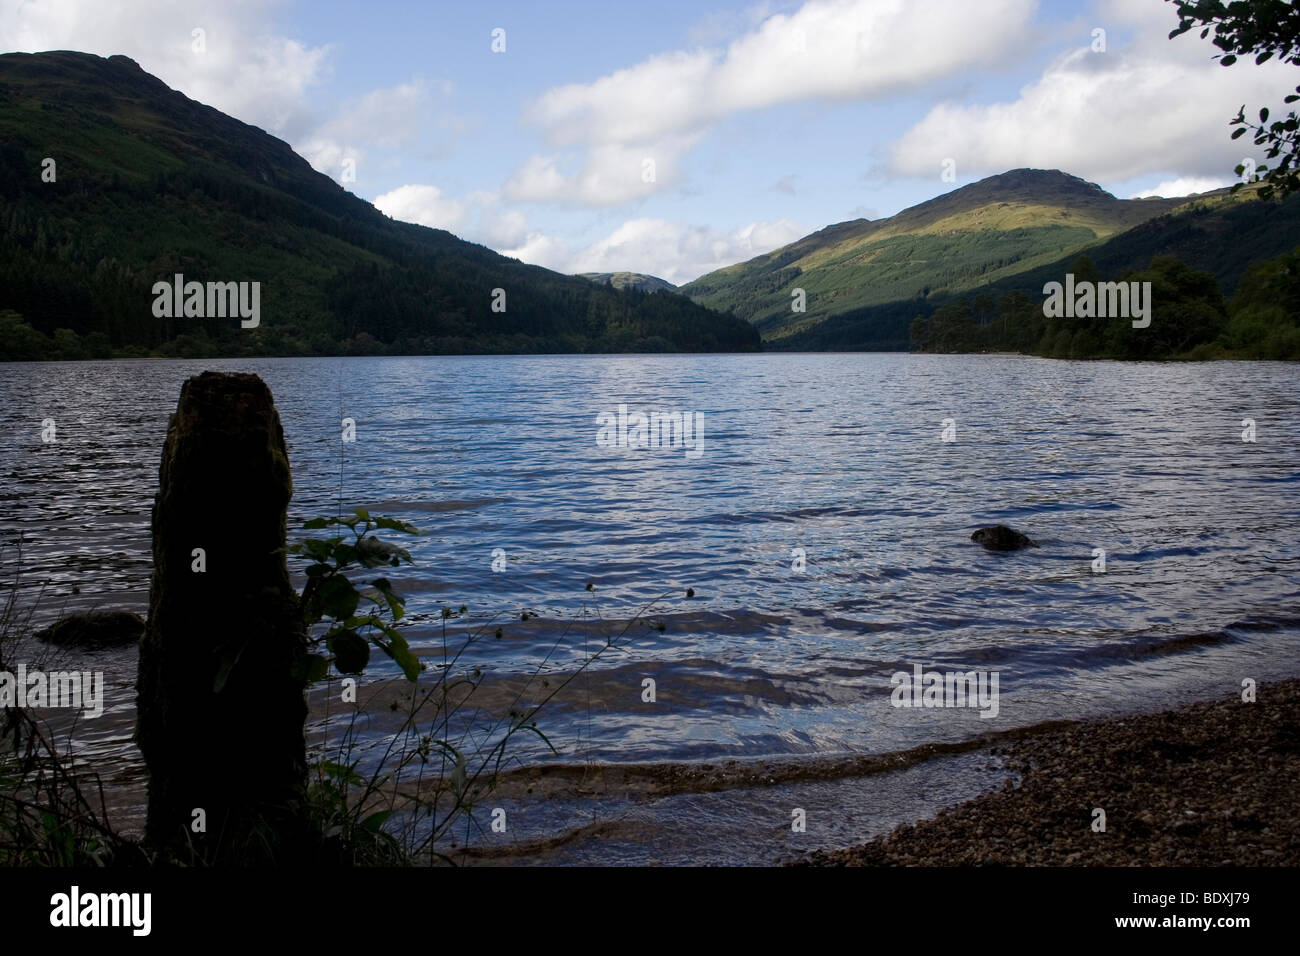 Over looking a Scottish Loch with mountains behind Stock Photo